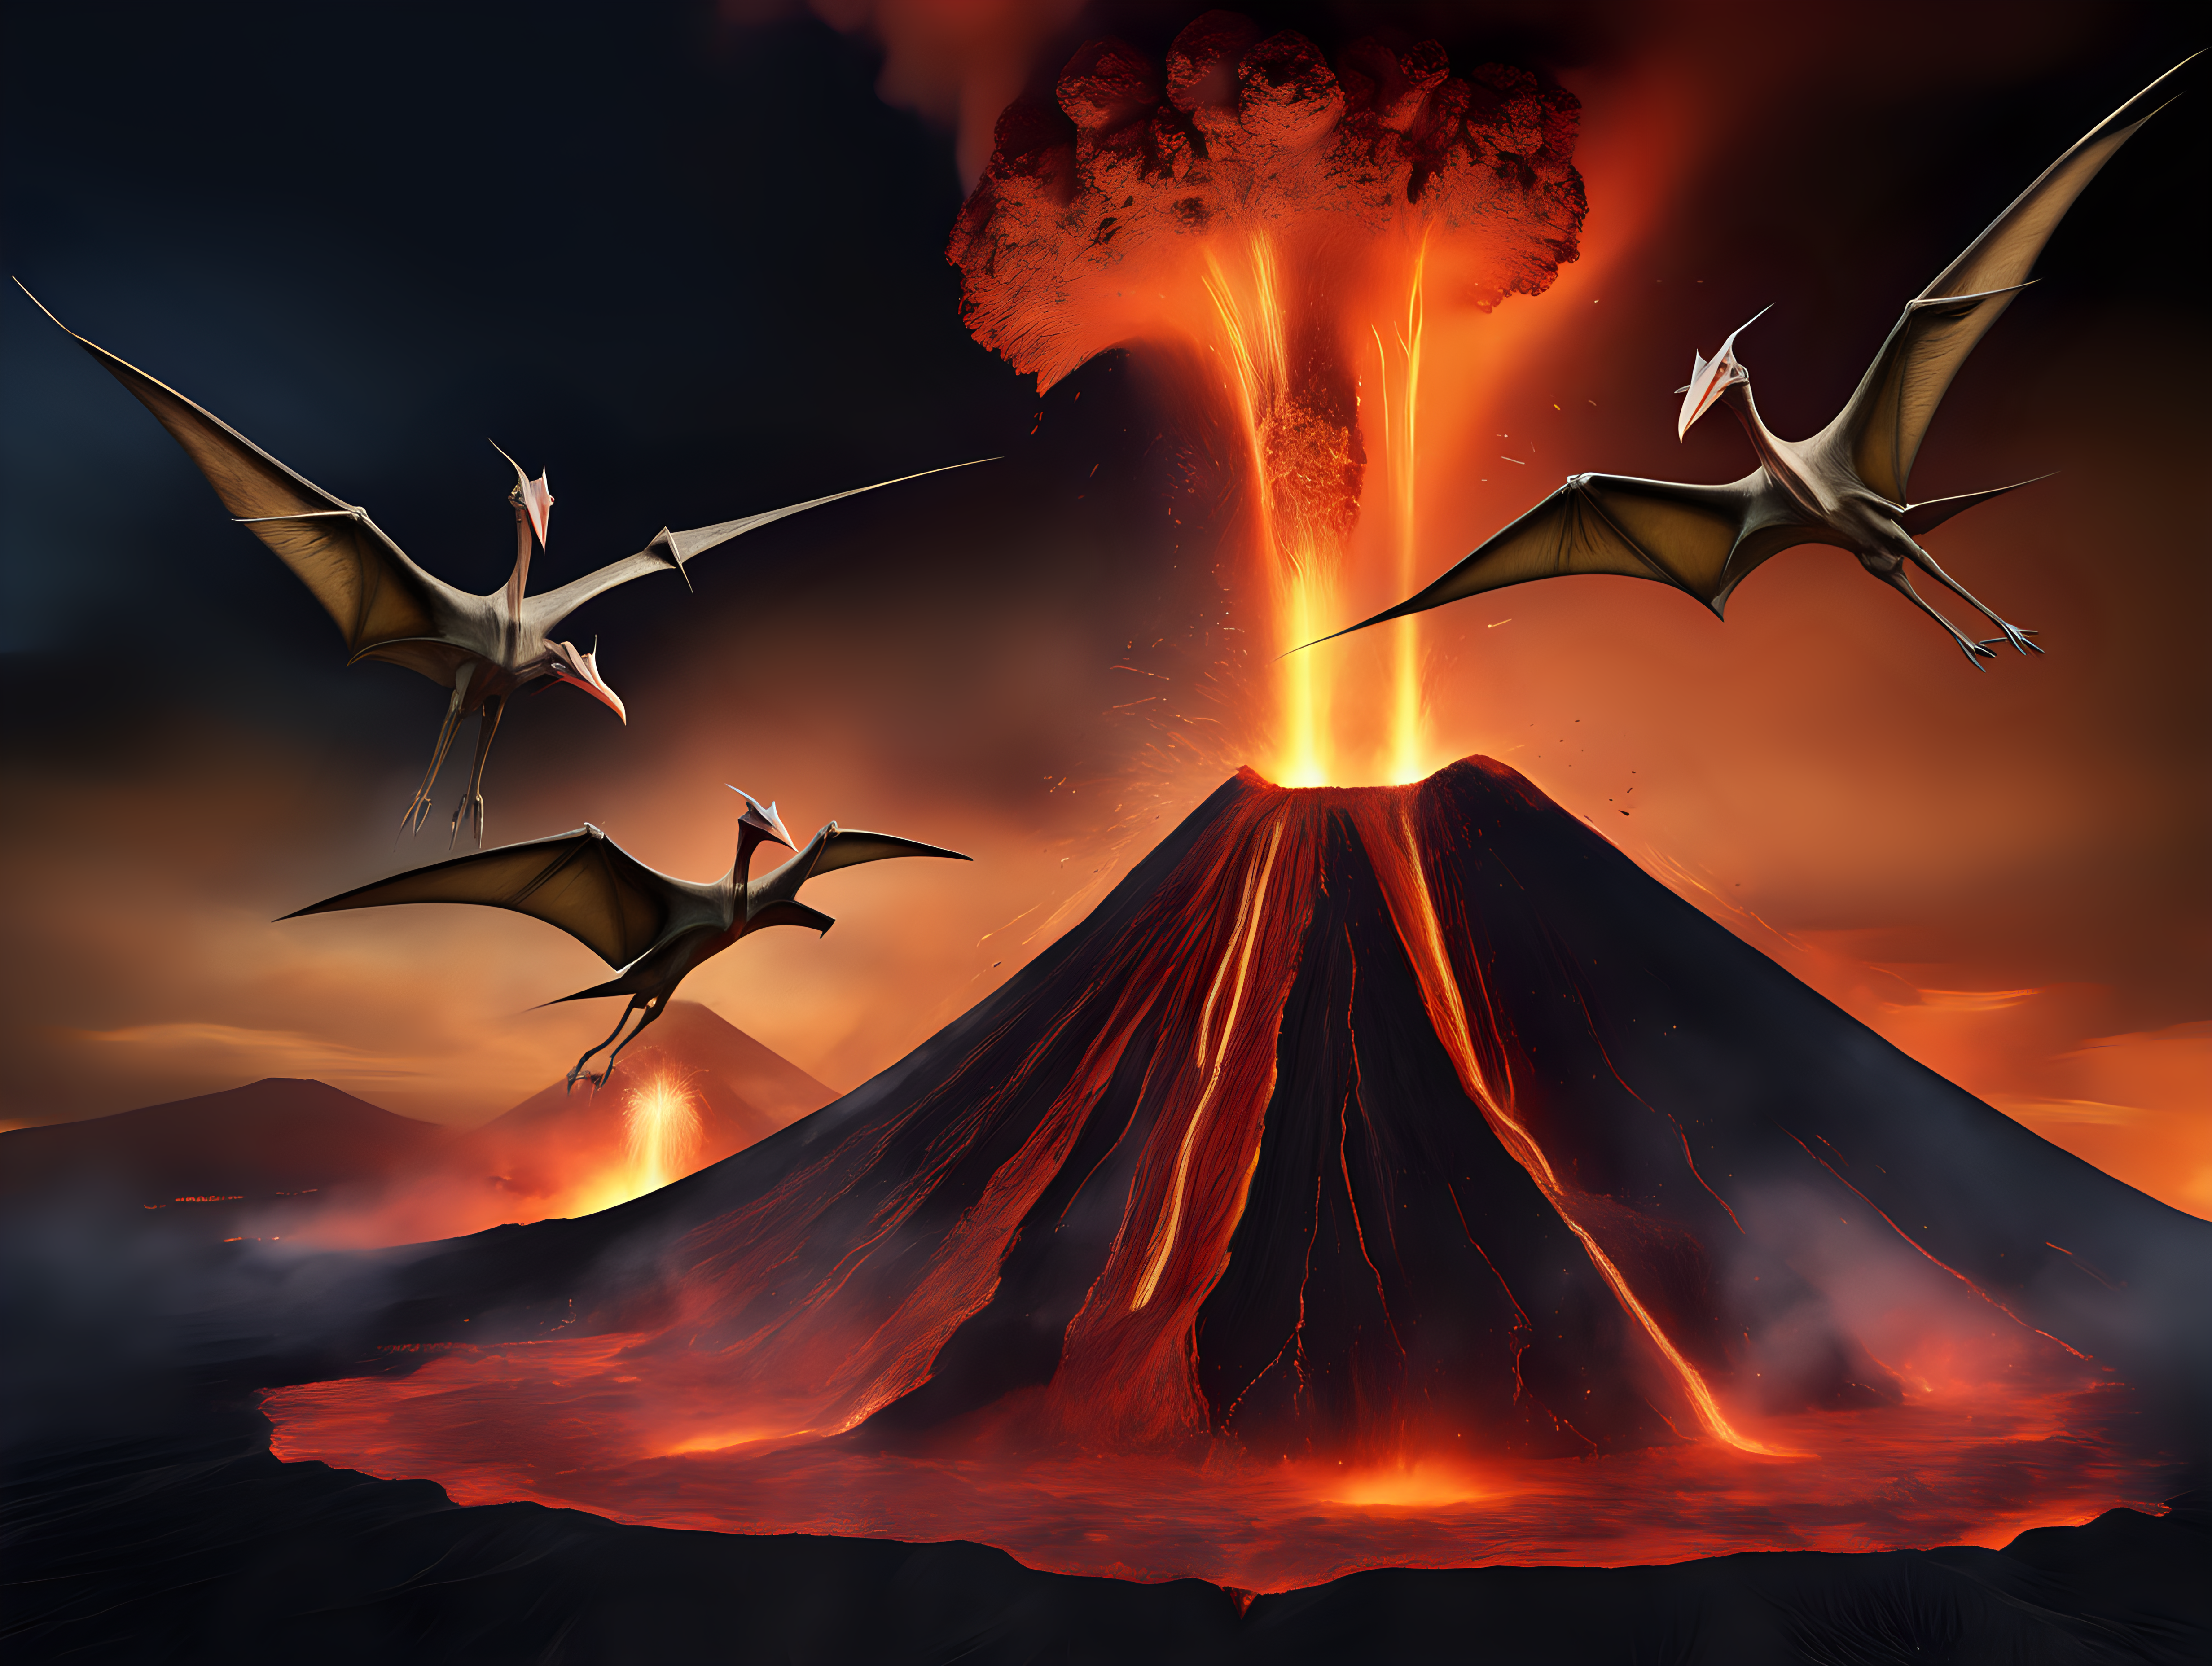 3 pterodactyls flying over an exploding volcano at night